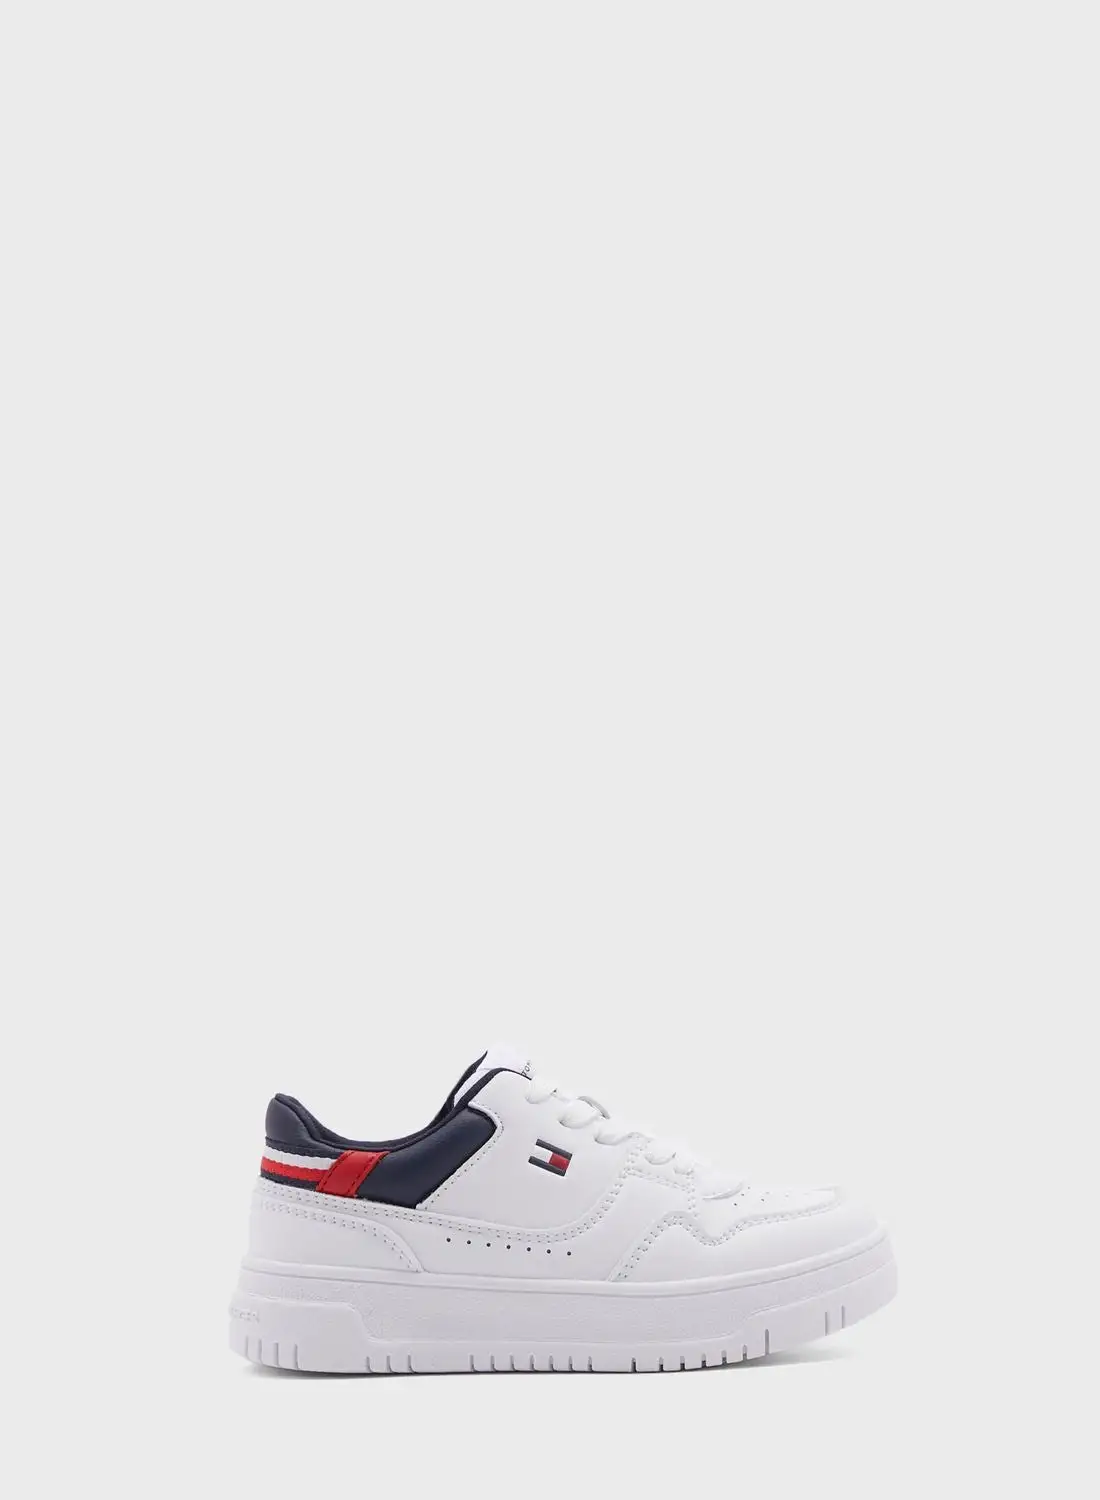 TOMMY HILFIGER Kids Low Top Lace Up Sneakers